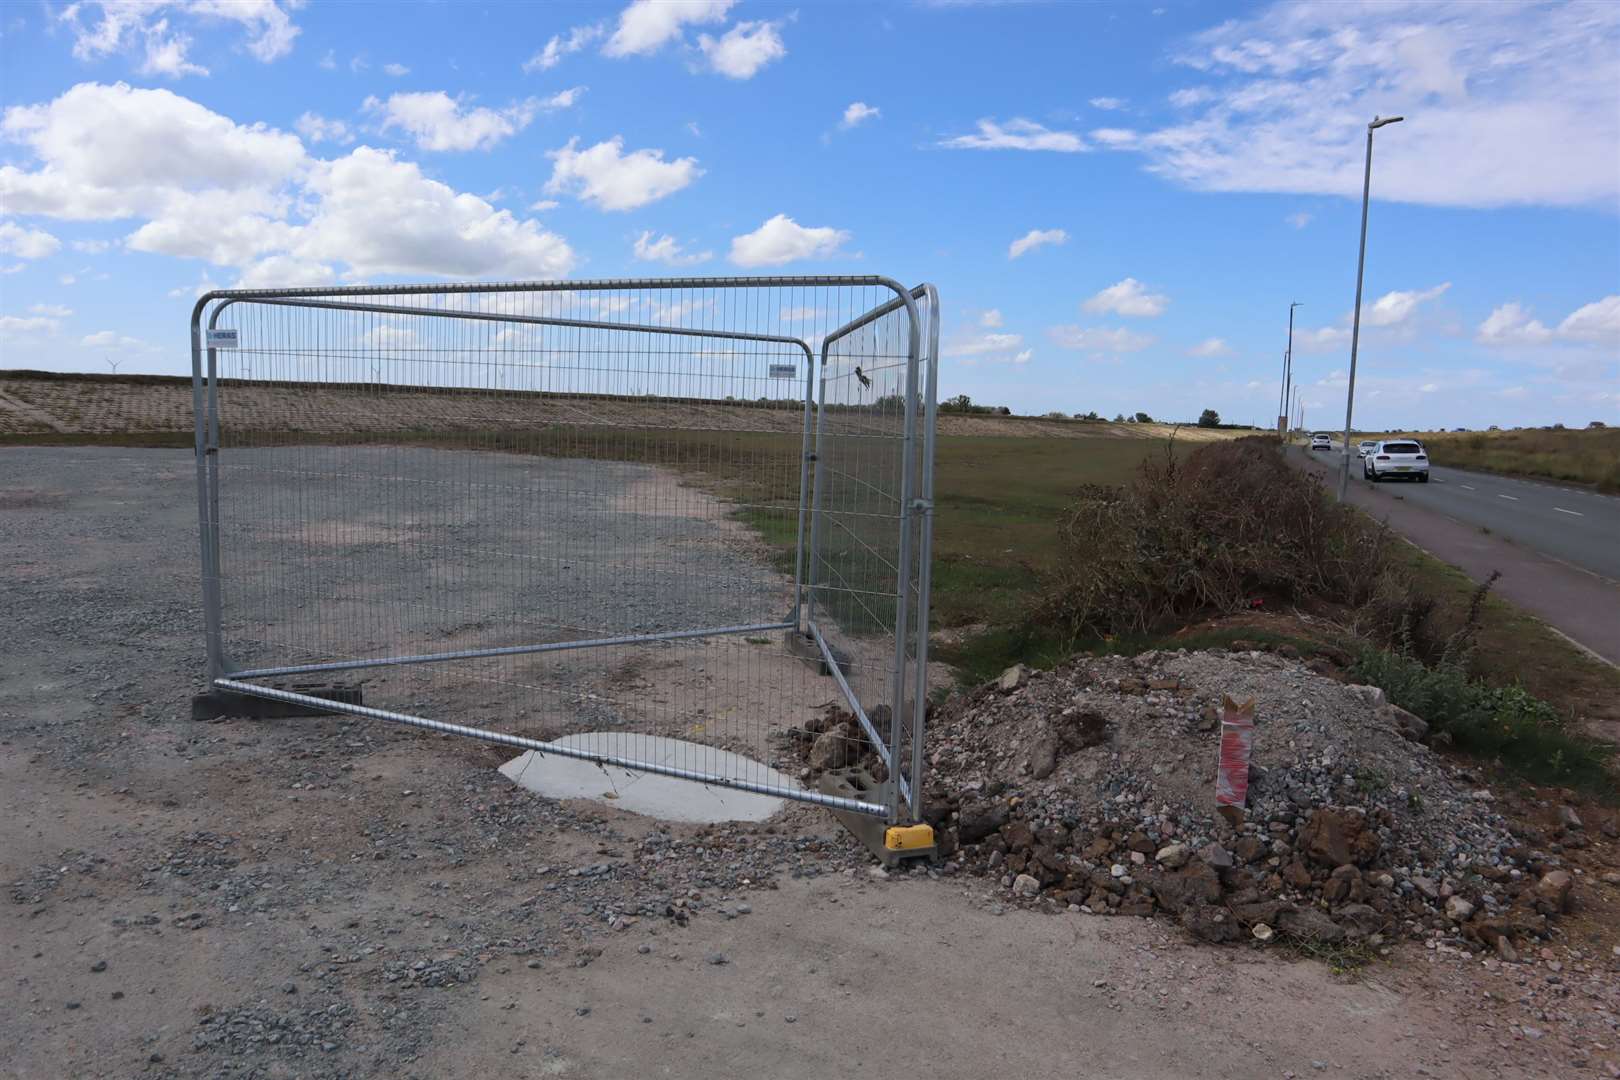 Overflow car park opposite the shingle bank at Minster is now open and awaiting height barriers